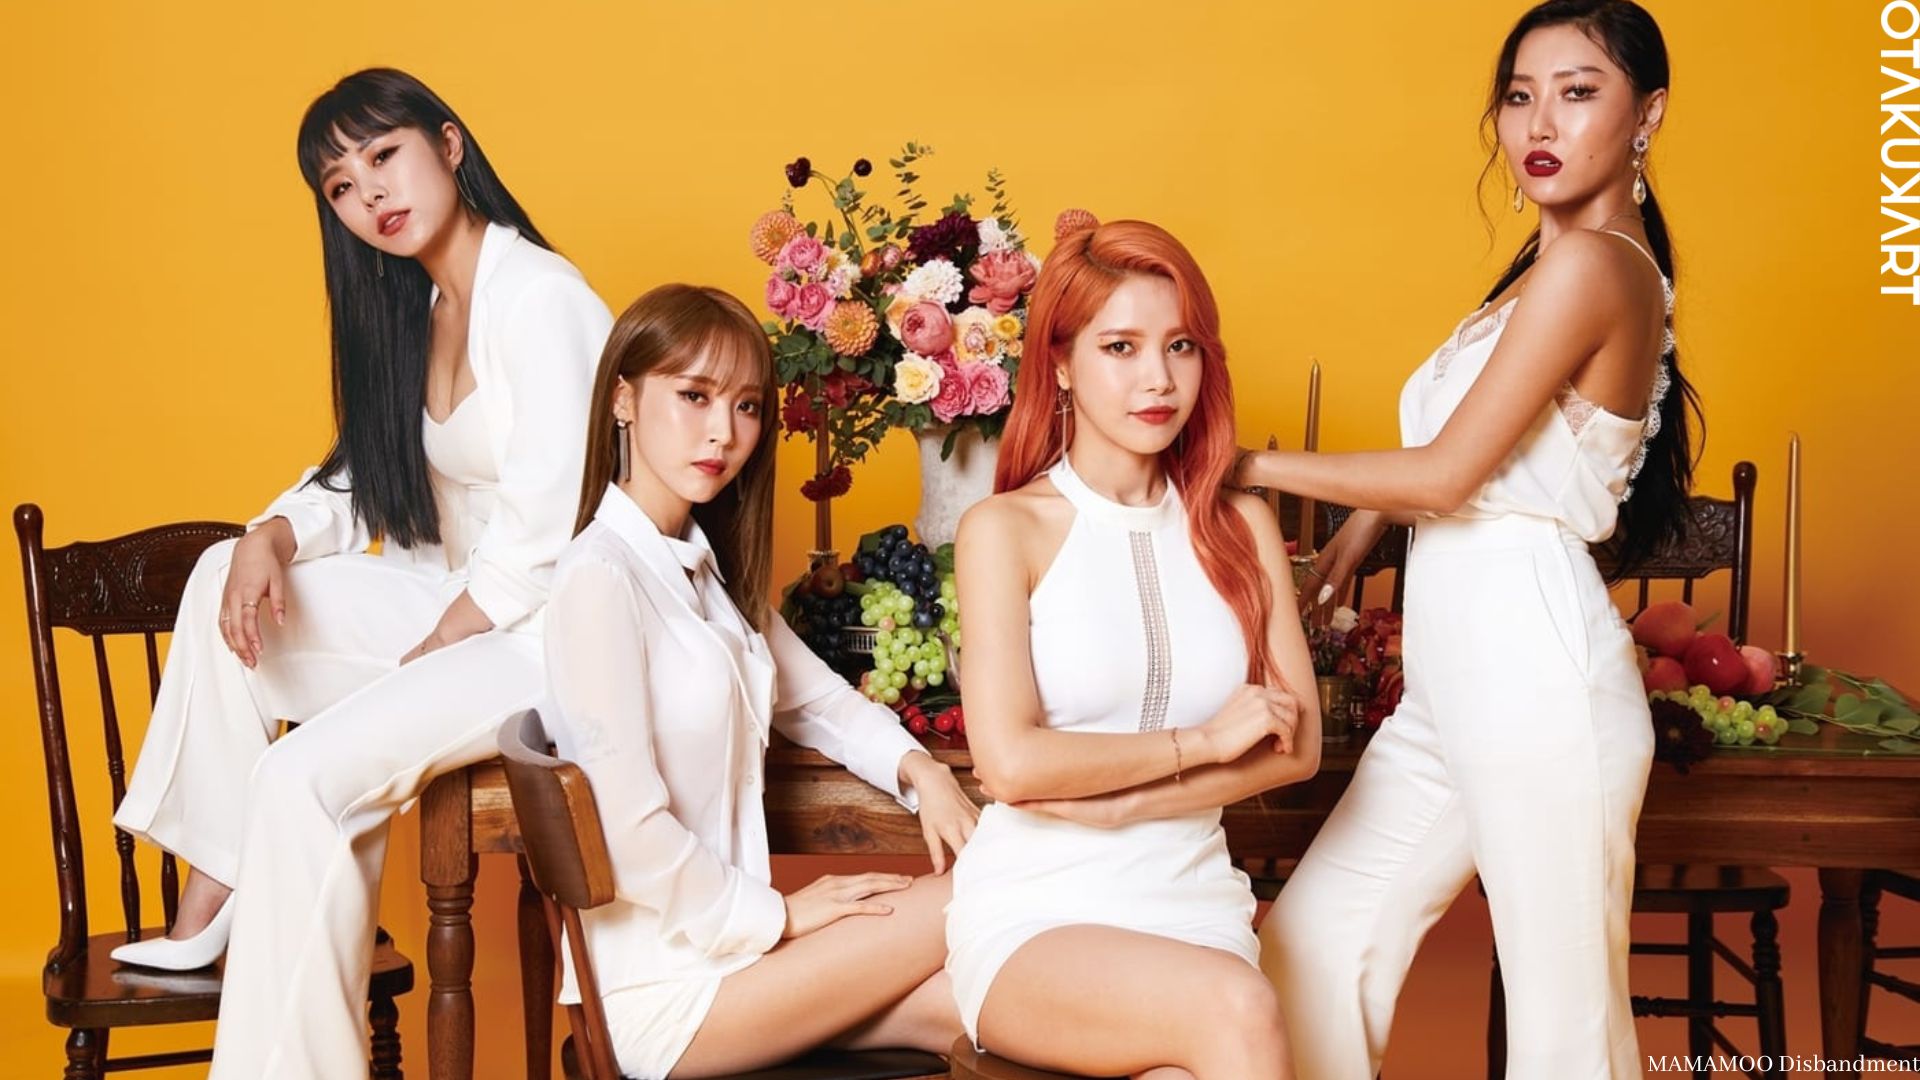 MAMAMOO’s Disbandment: When Will the 3rd Generation Girl Group Disband?